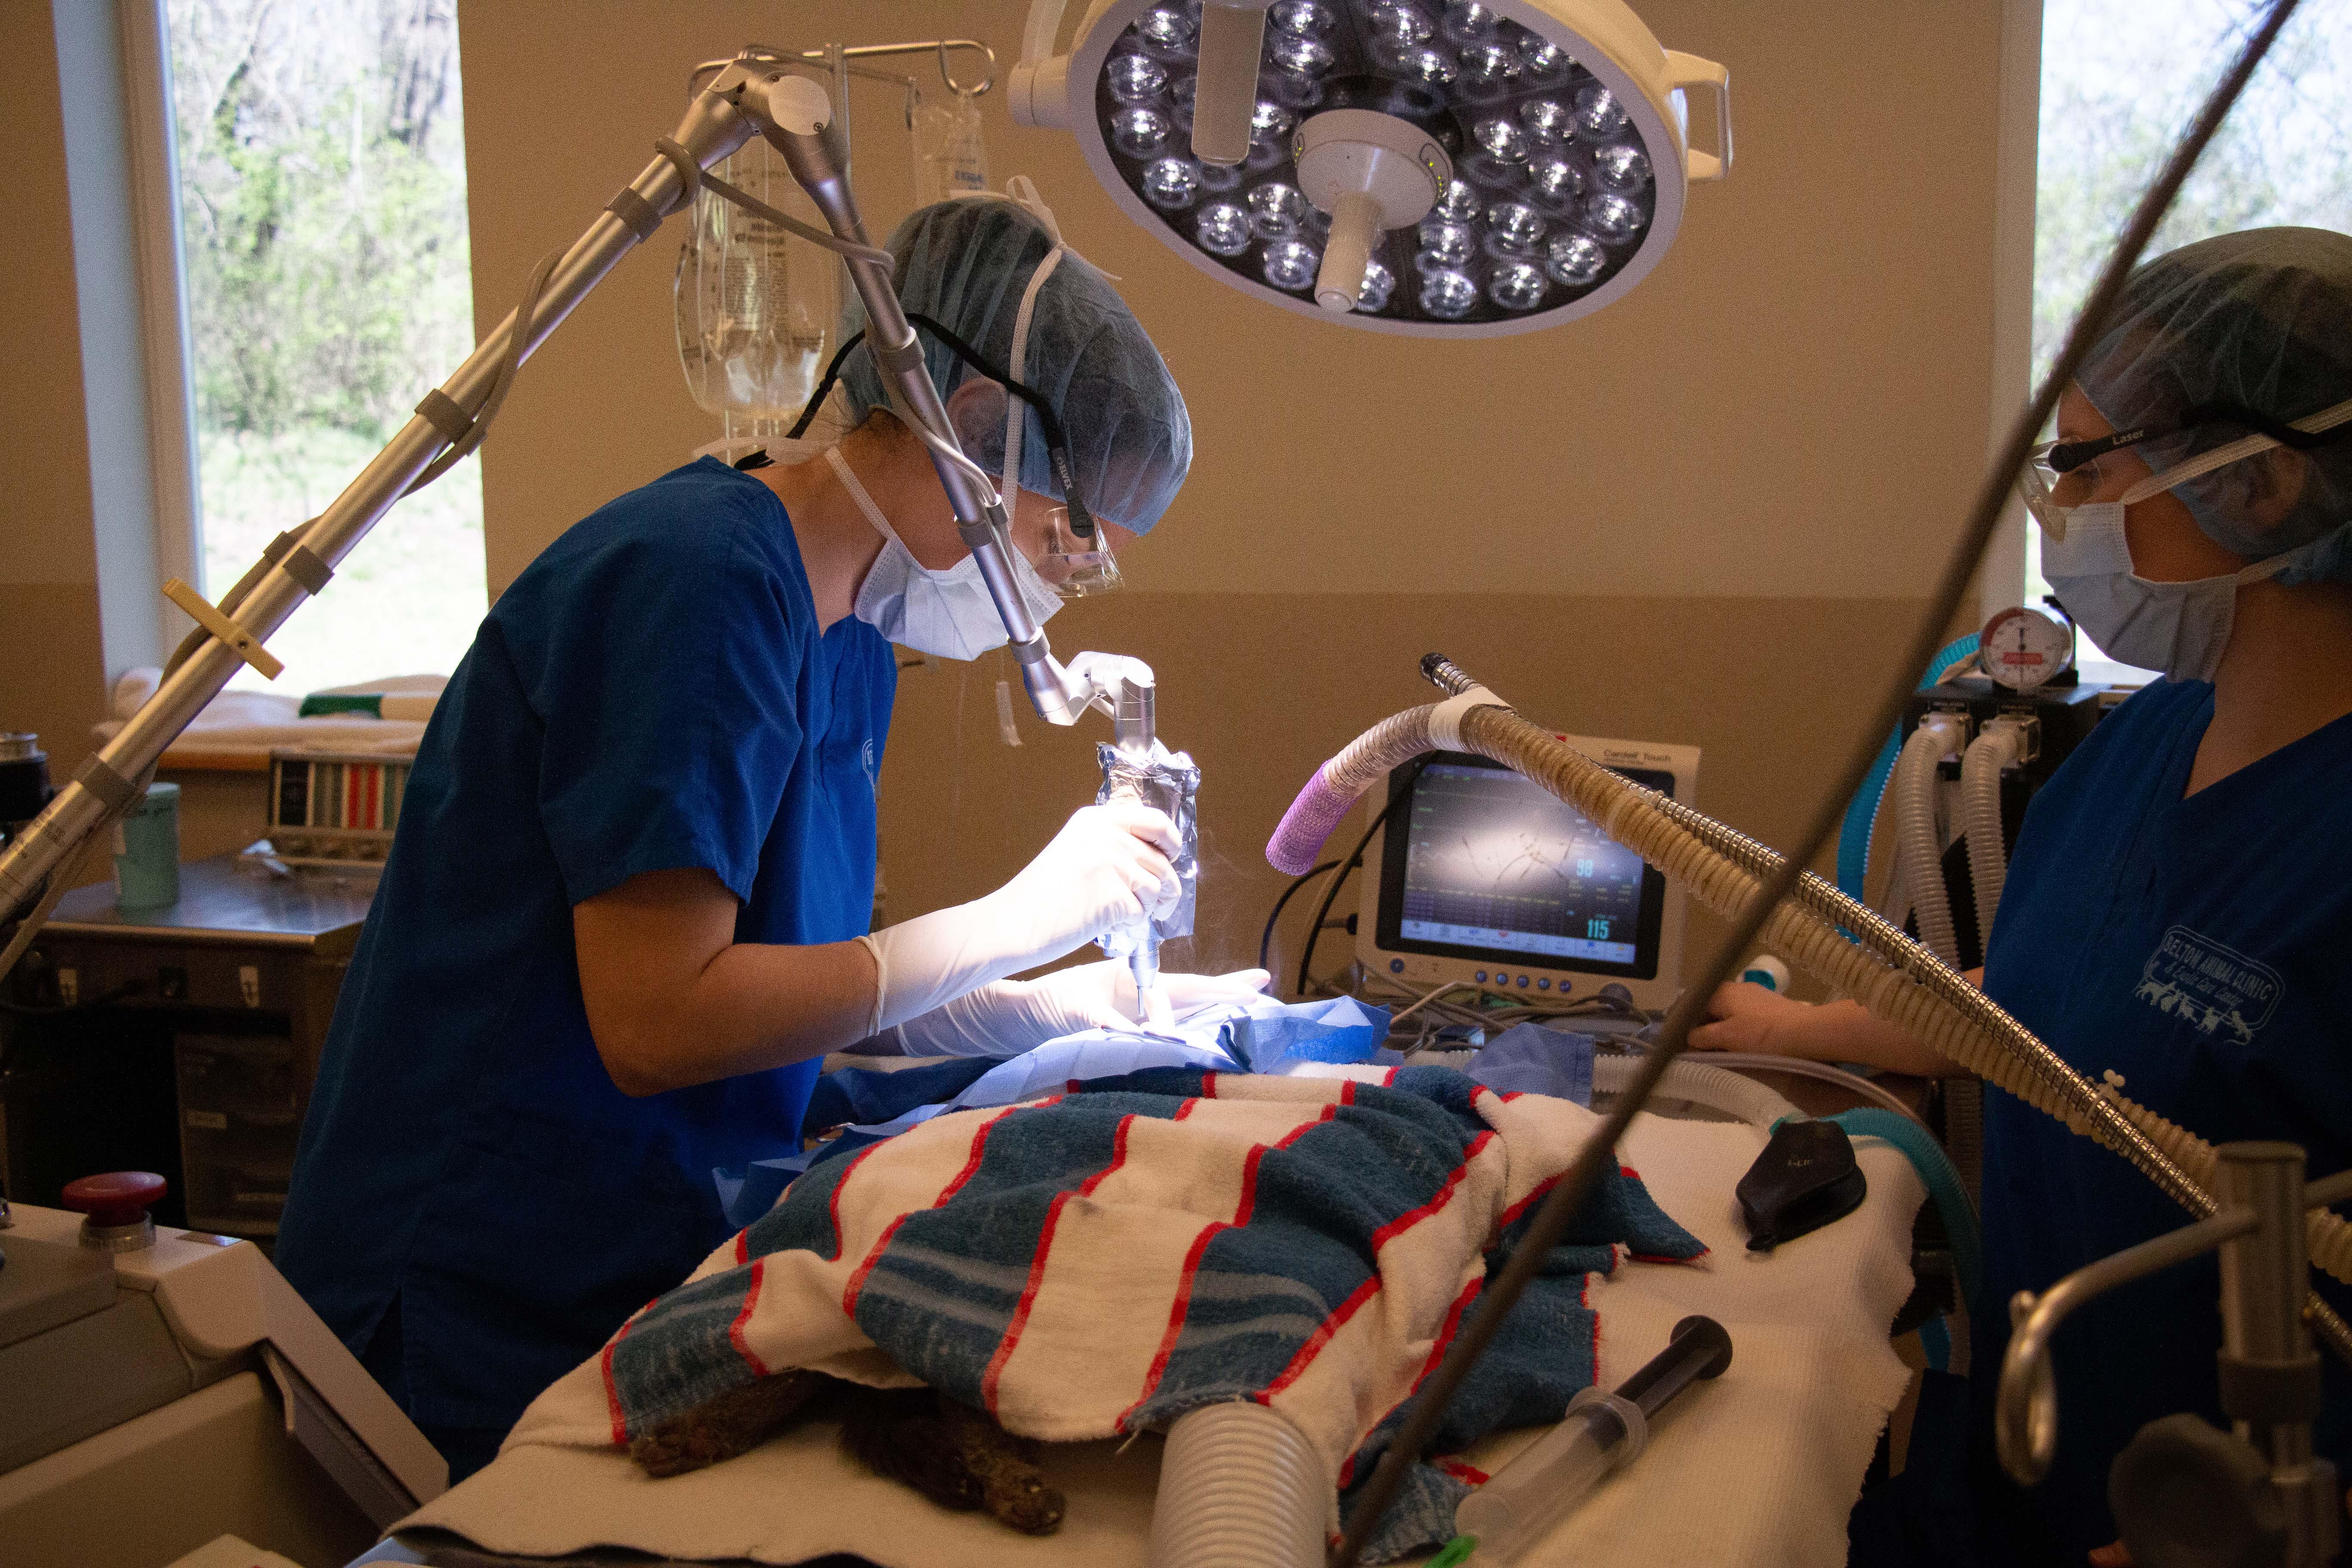 Belton's veterinary team is experienced conducting all kinds of surgical procedures. Following some of the most stringent protocols in the industry, our veterinarians routinely conduct spays/neuters, dental surgery, and many, many other procedures for our patients.